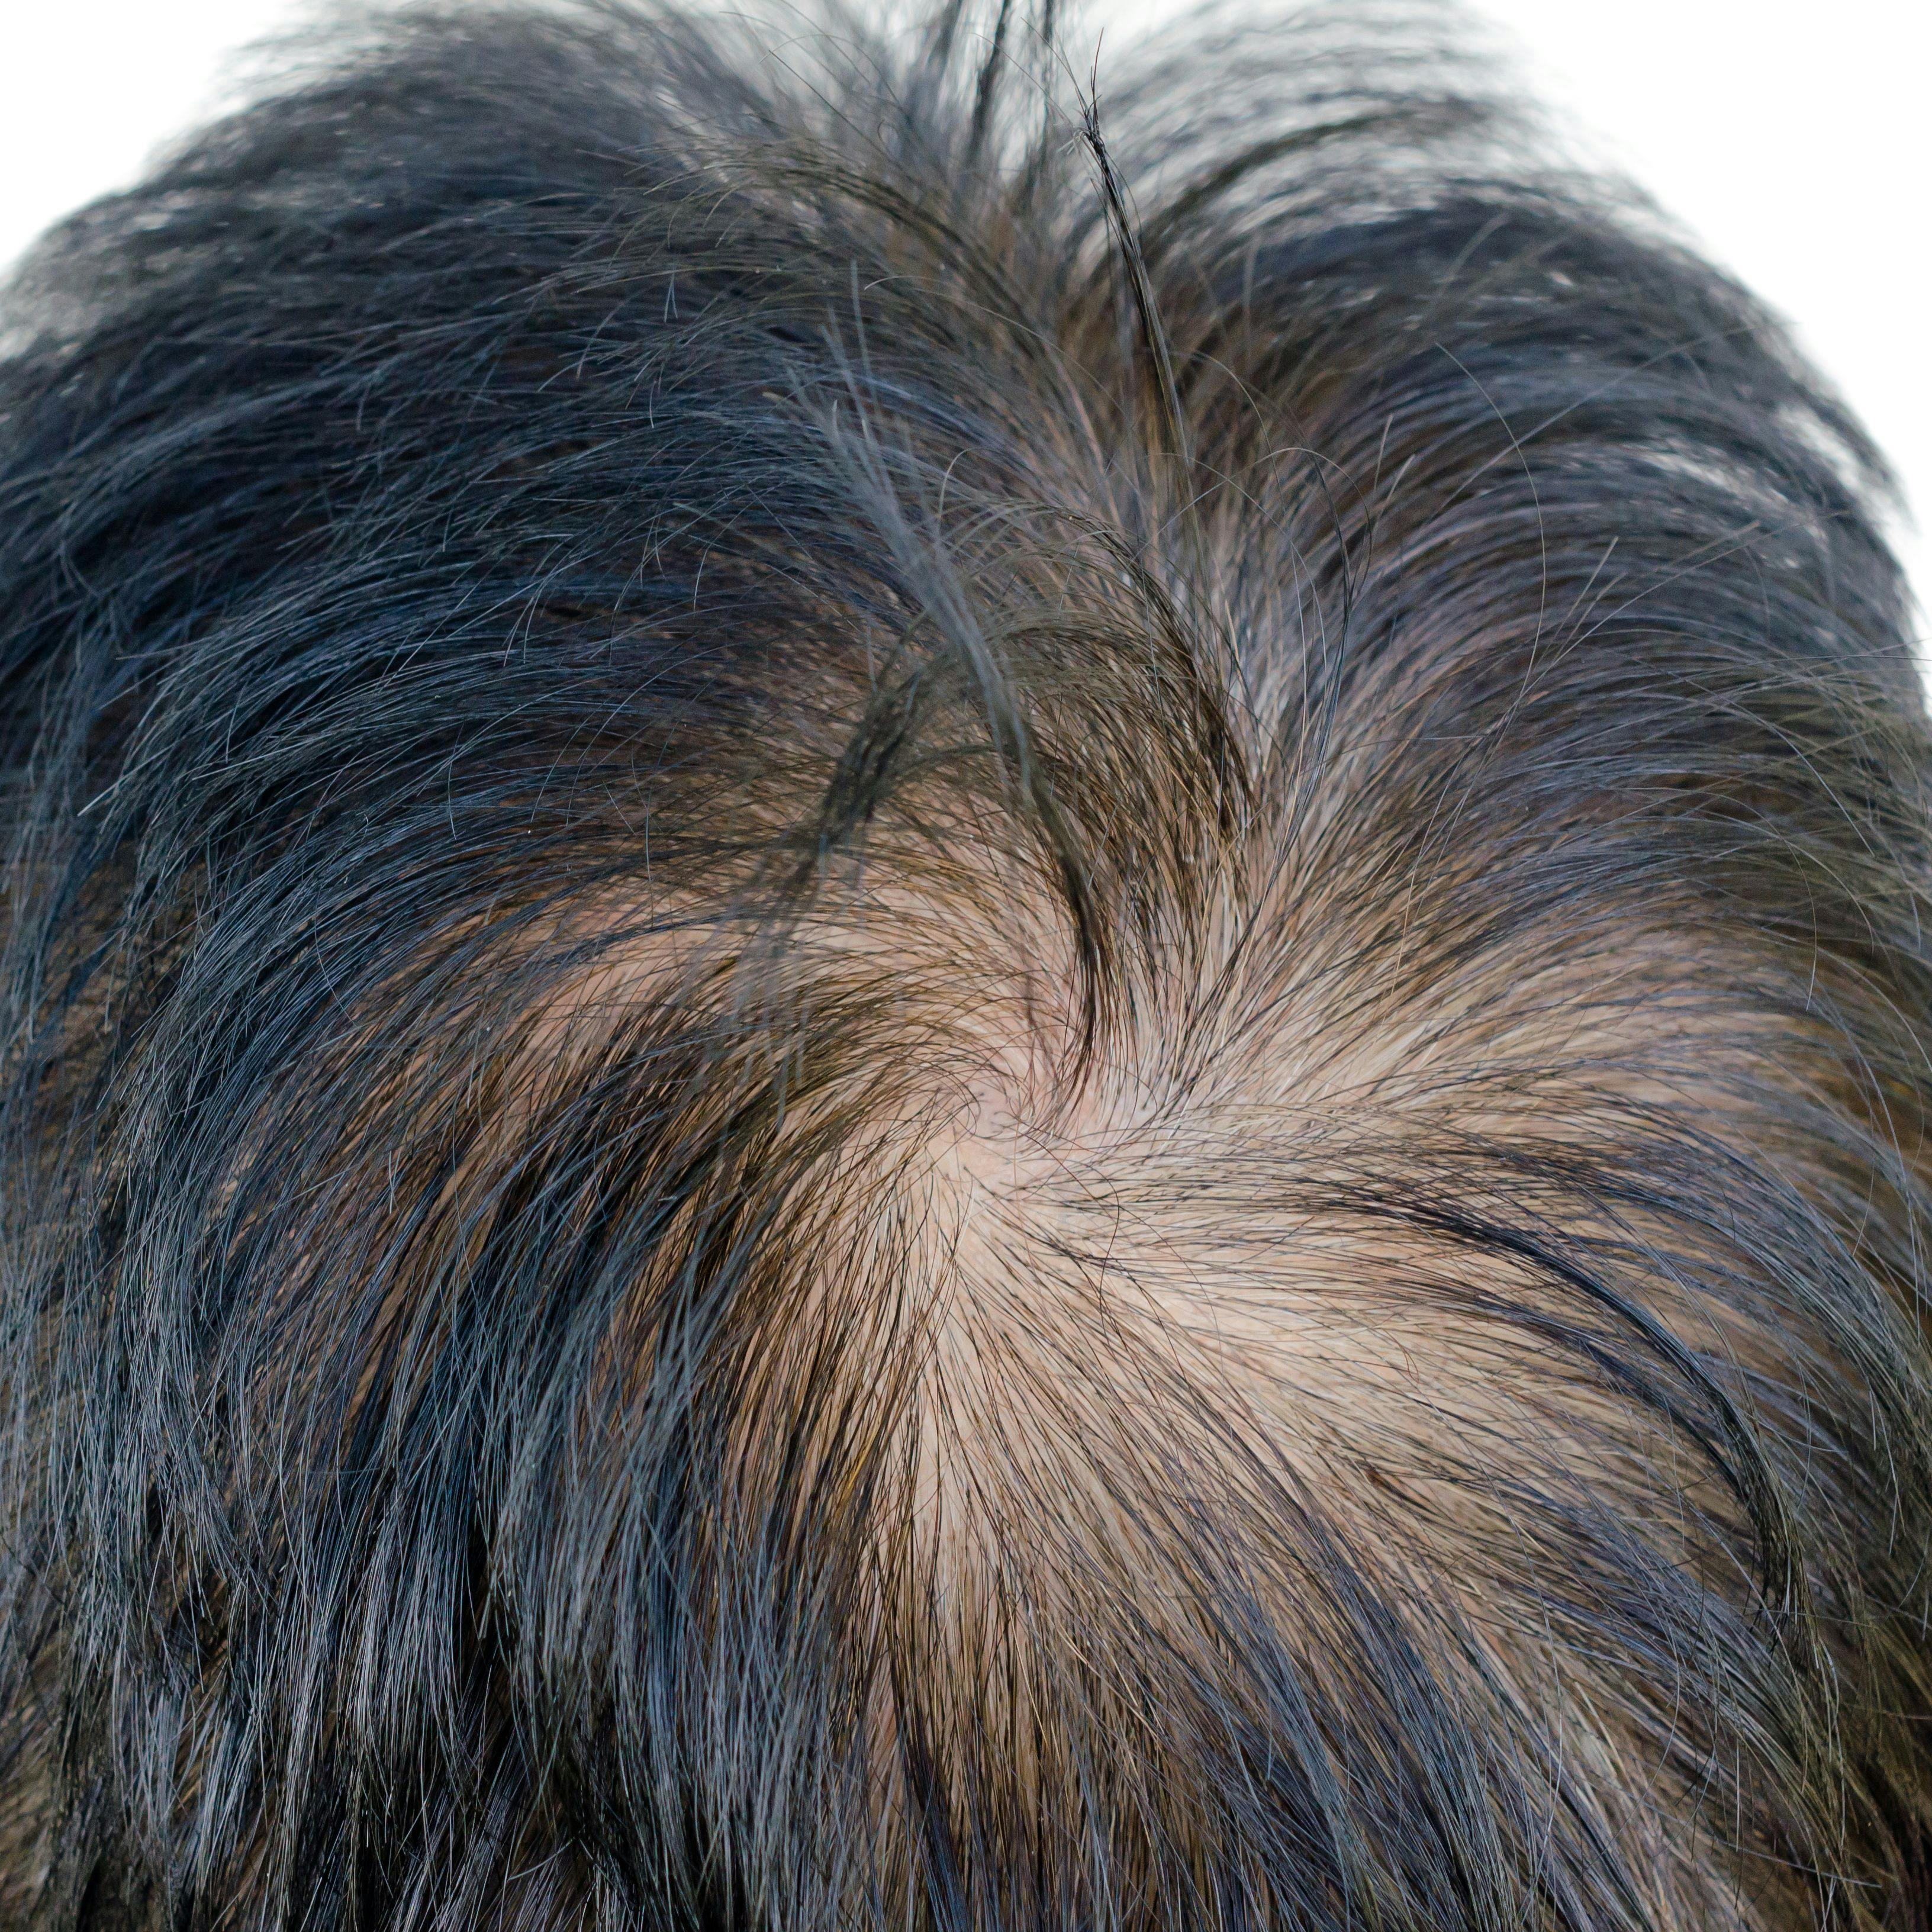 Minoxidil Combined With Laser Treatment Improves Hair Condition in Androgenetic Alopecia